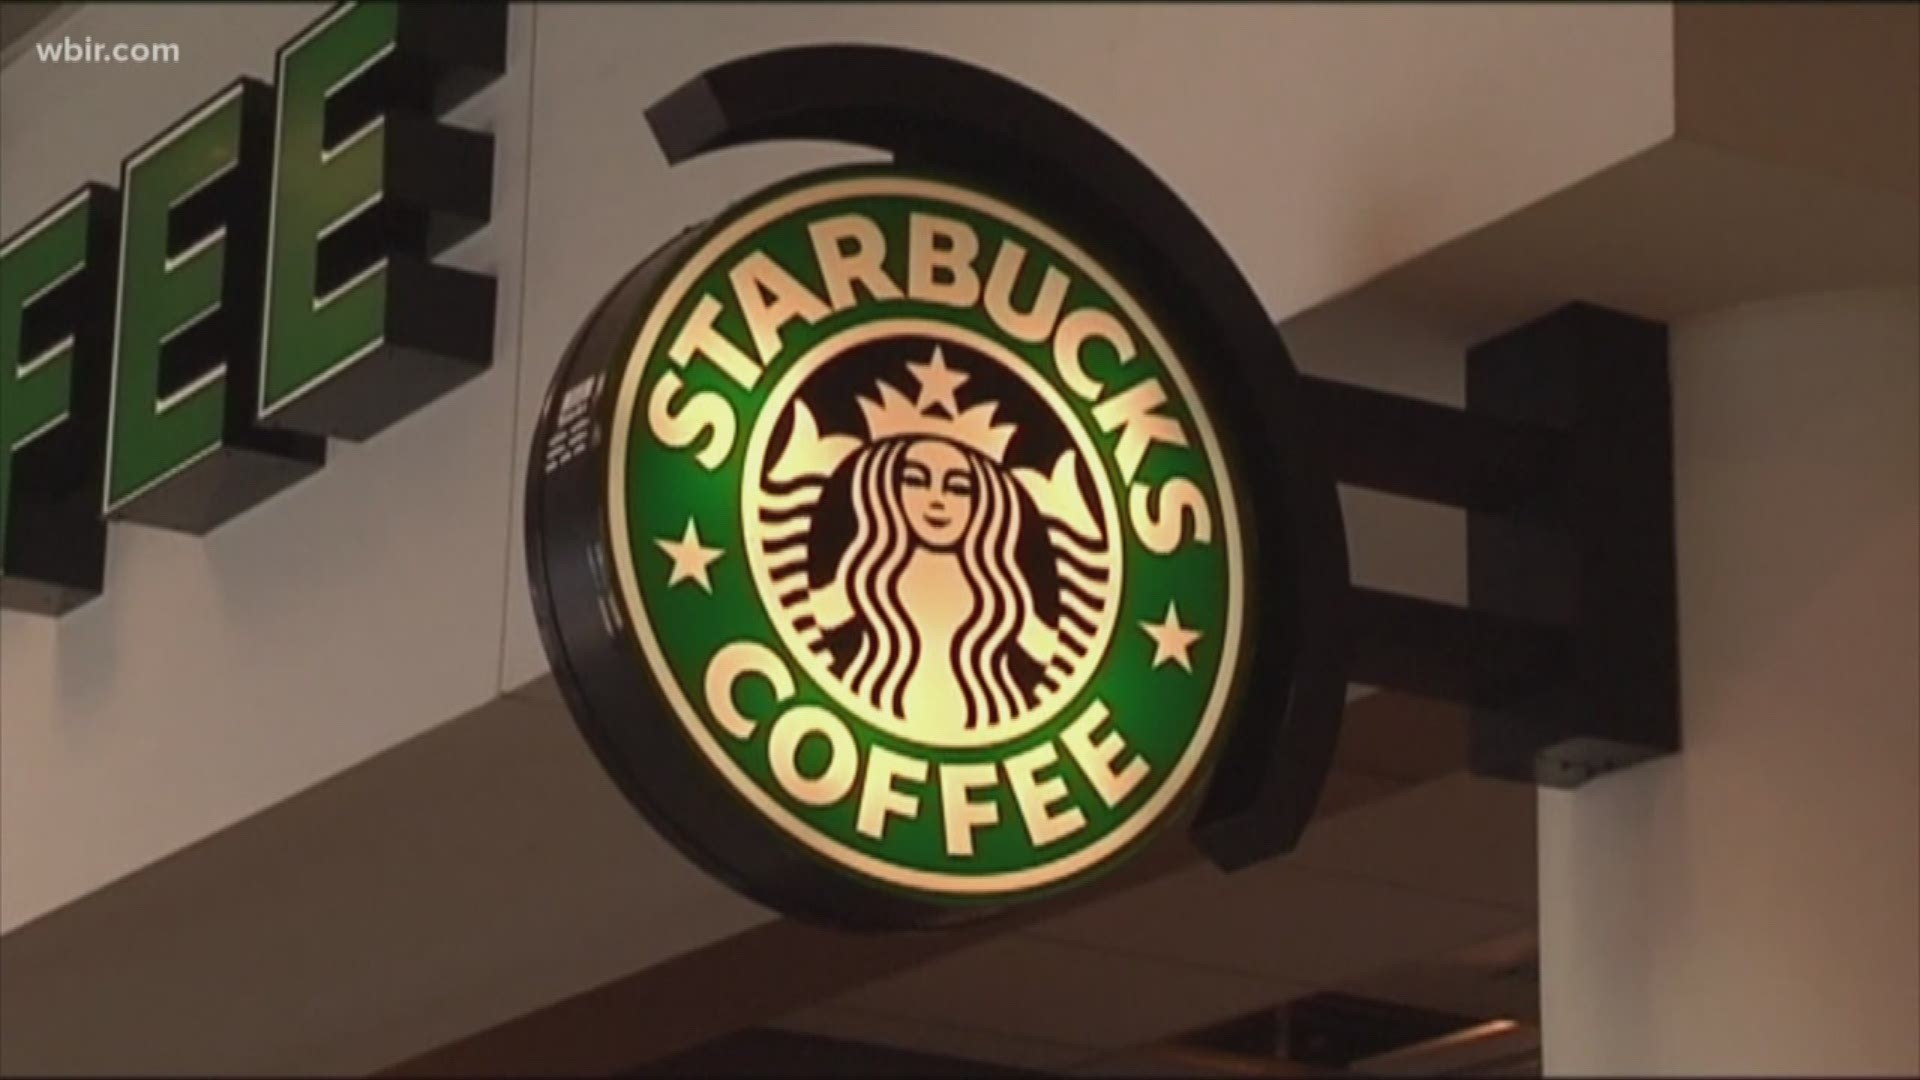 Starbucks says the espresso frappuccino is the top drink for students across the country.